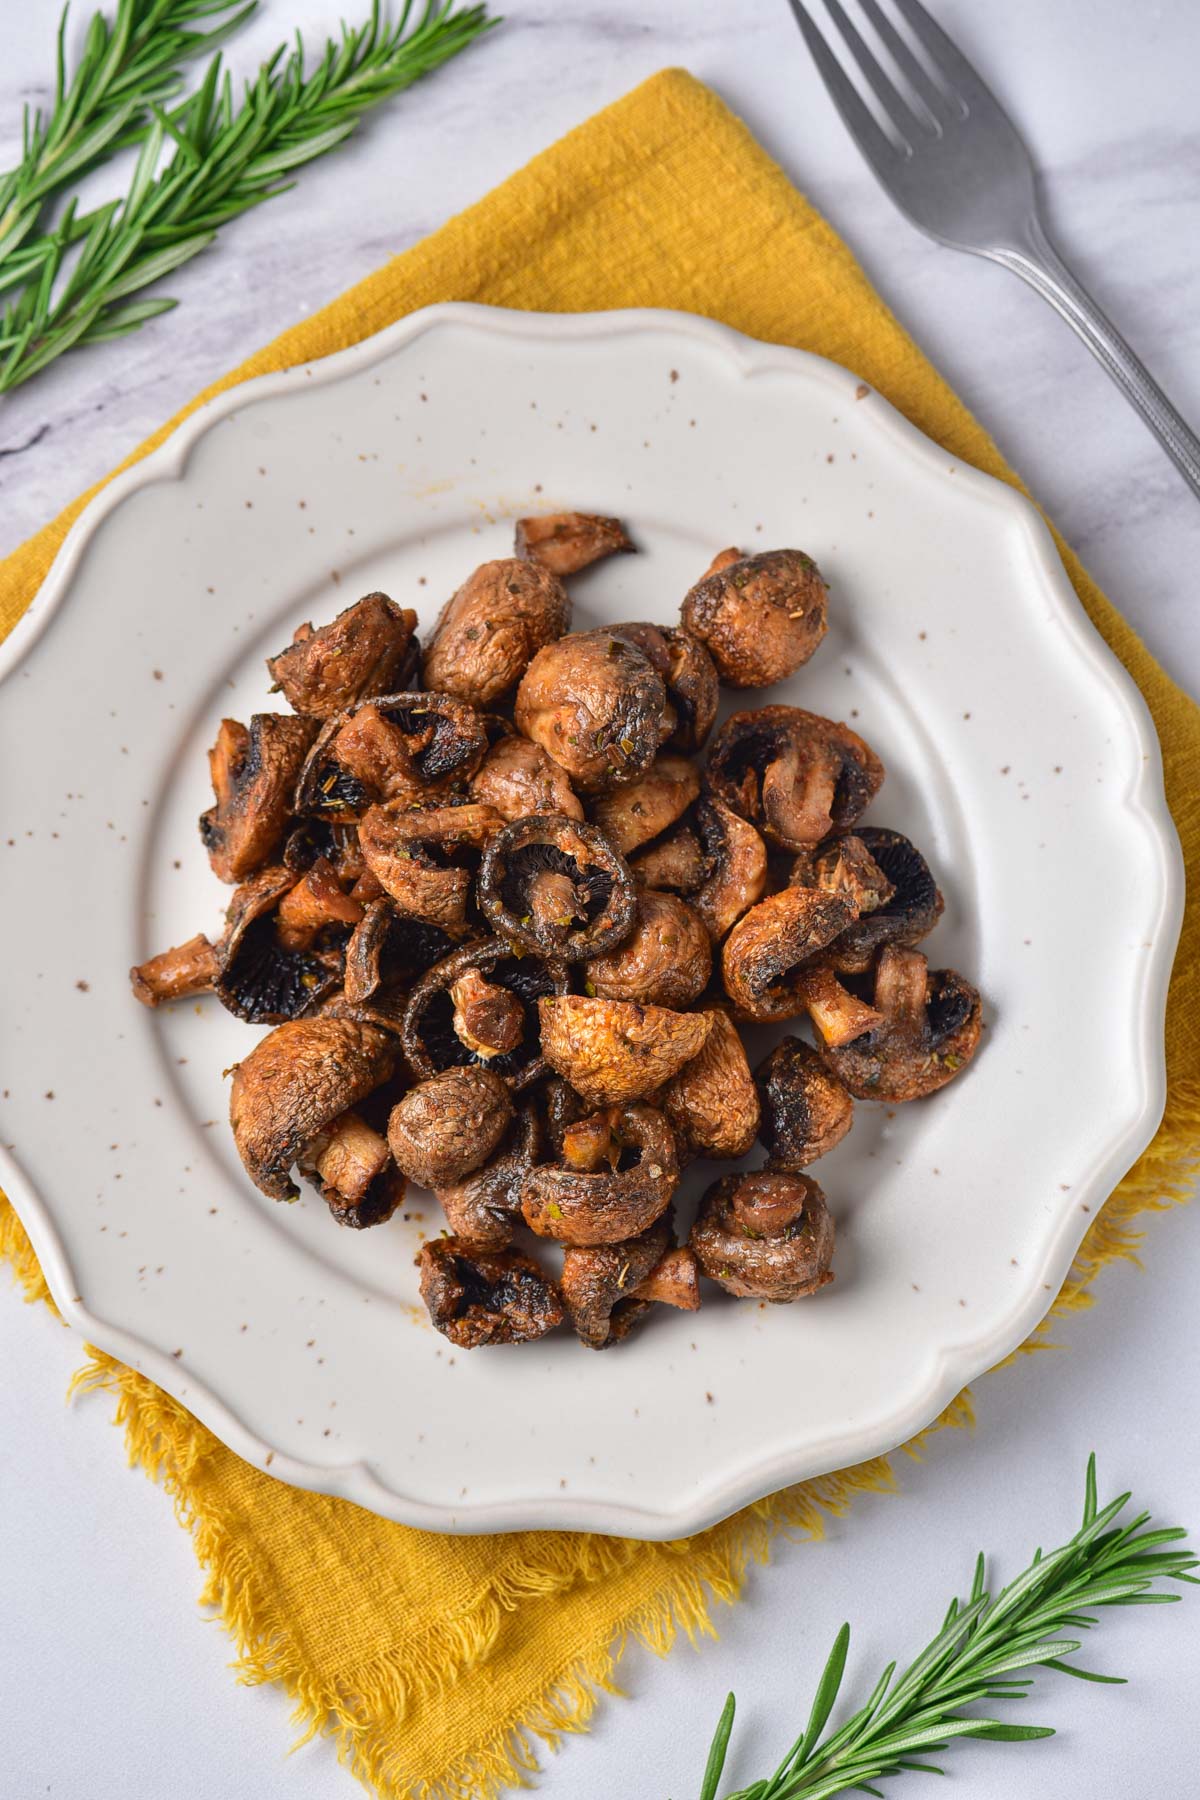 the completed air fryer mushrooms recipe served on a white plate on top of a yellow placemat